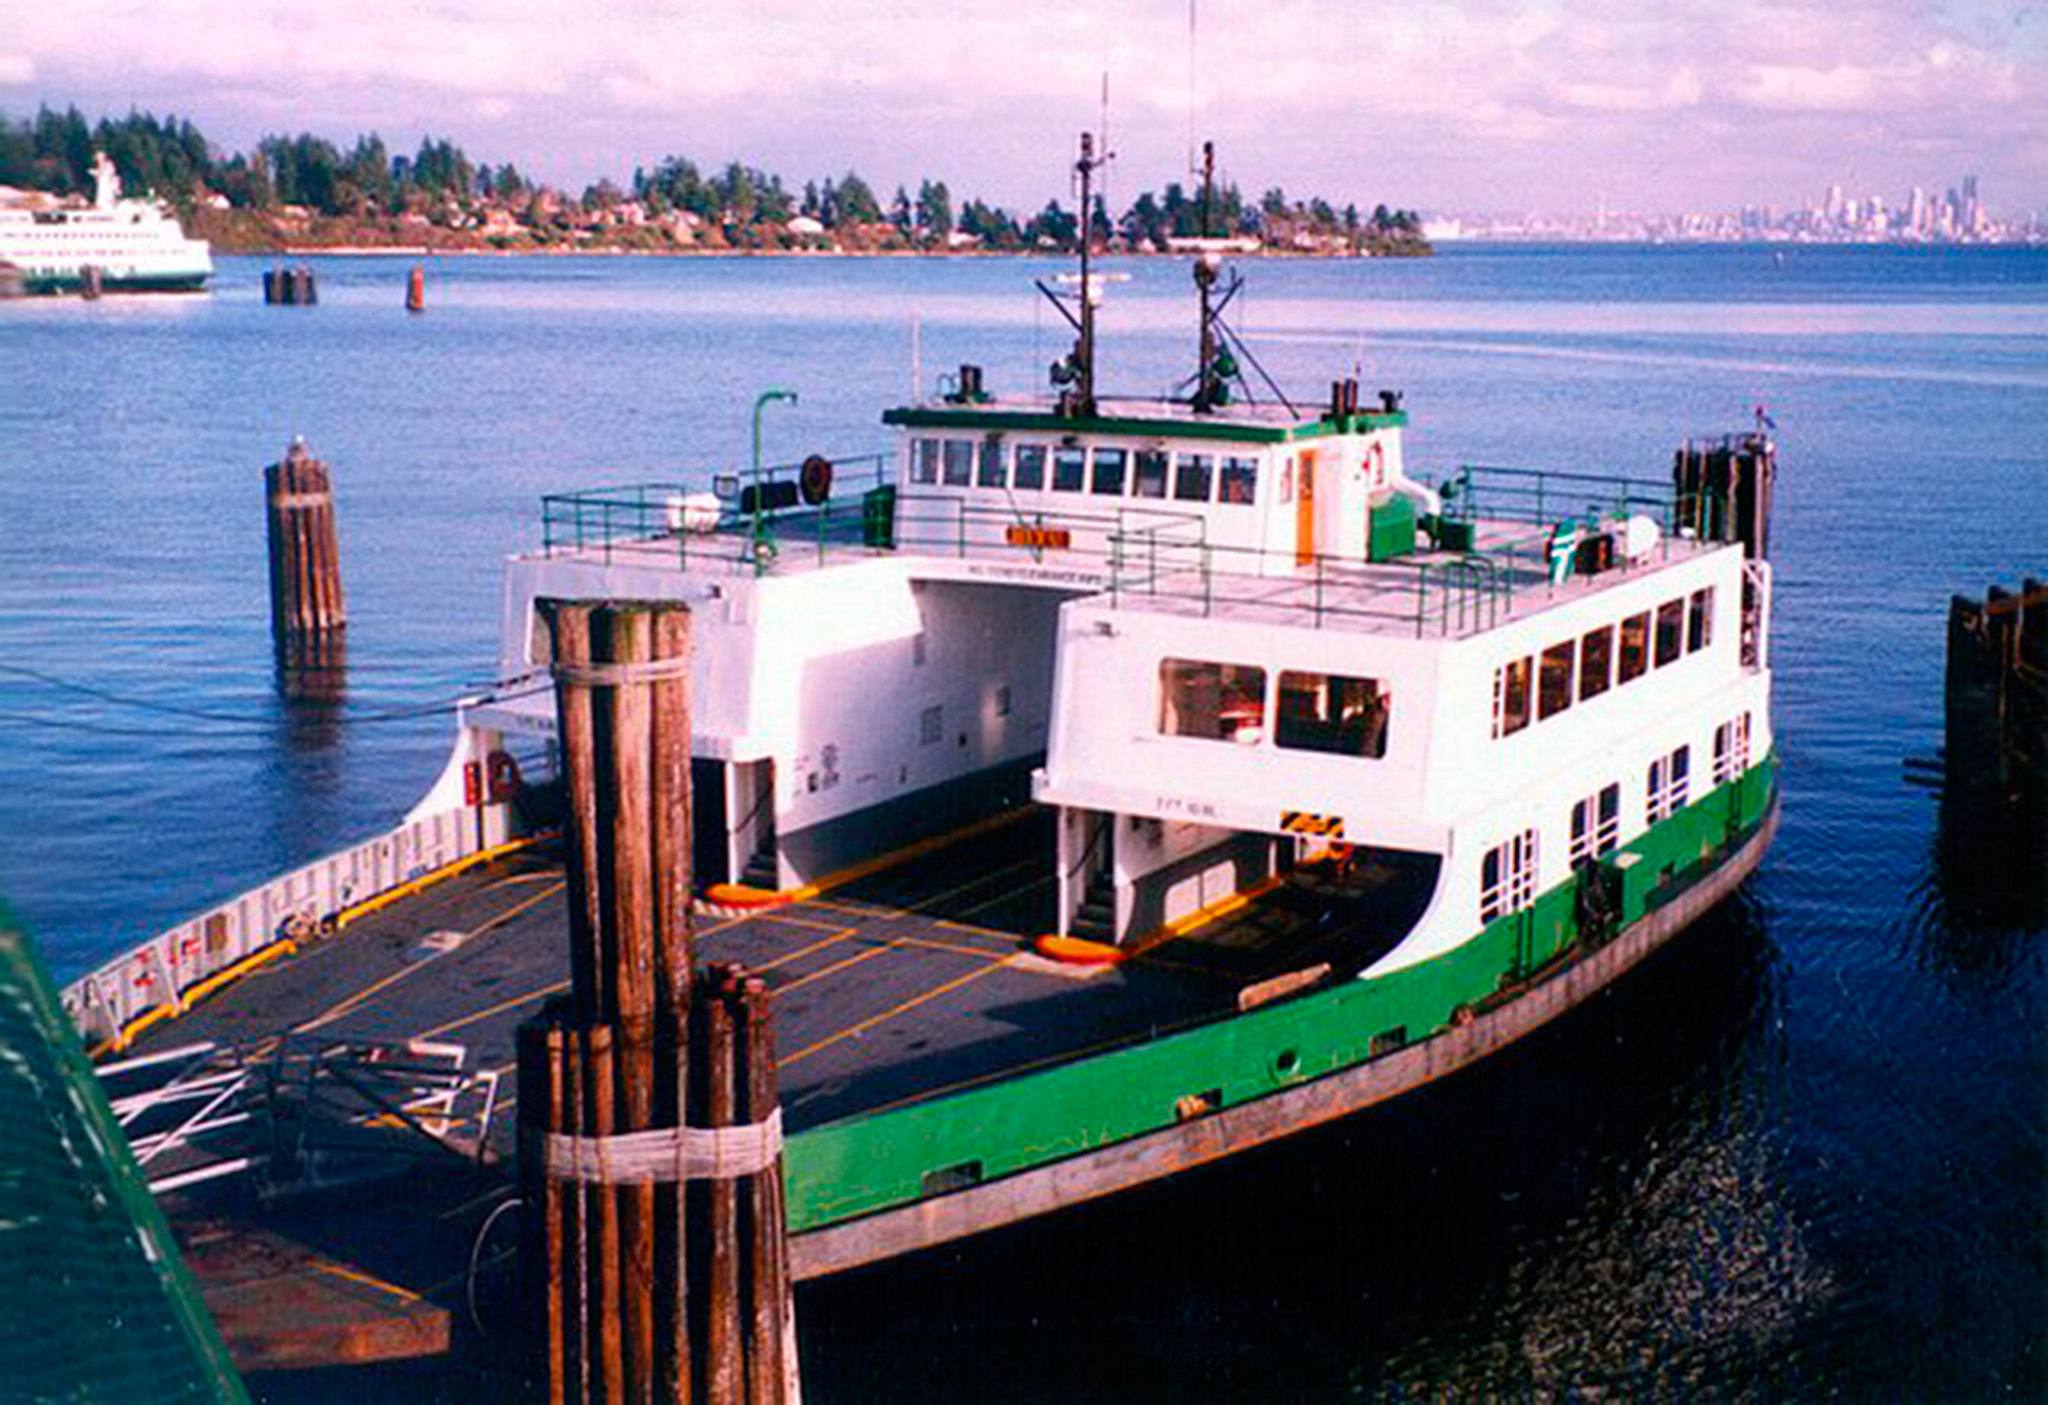 Fifty-year-old ferry retires to become entertainment vessel | The